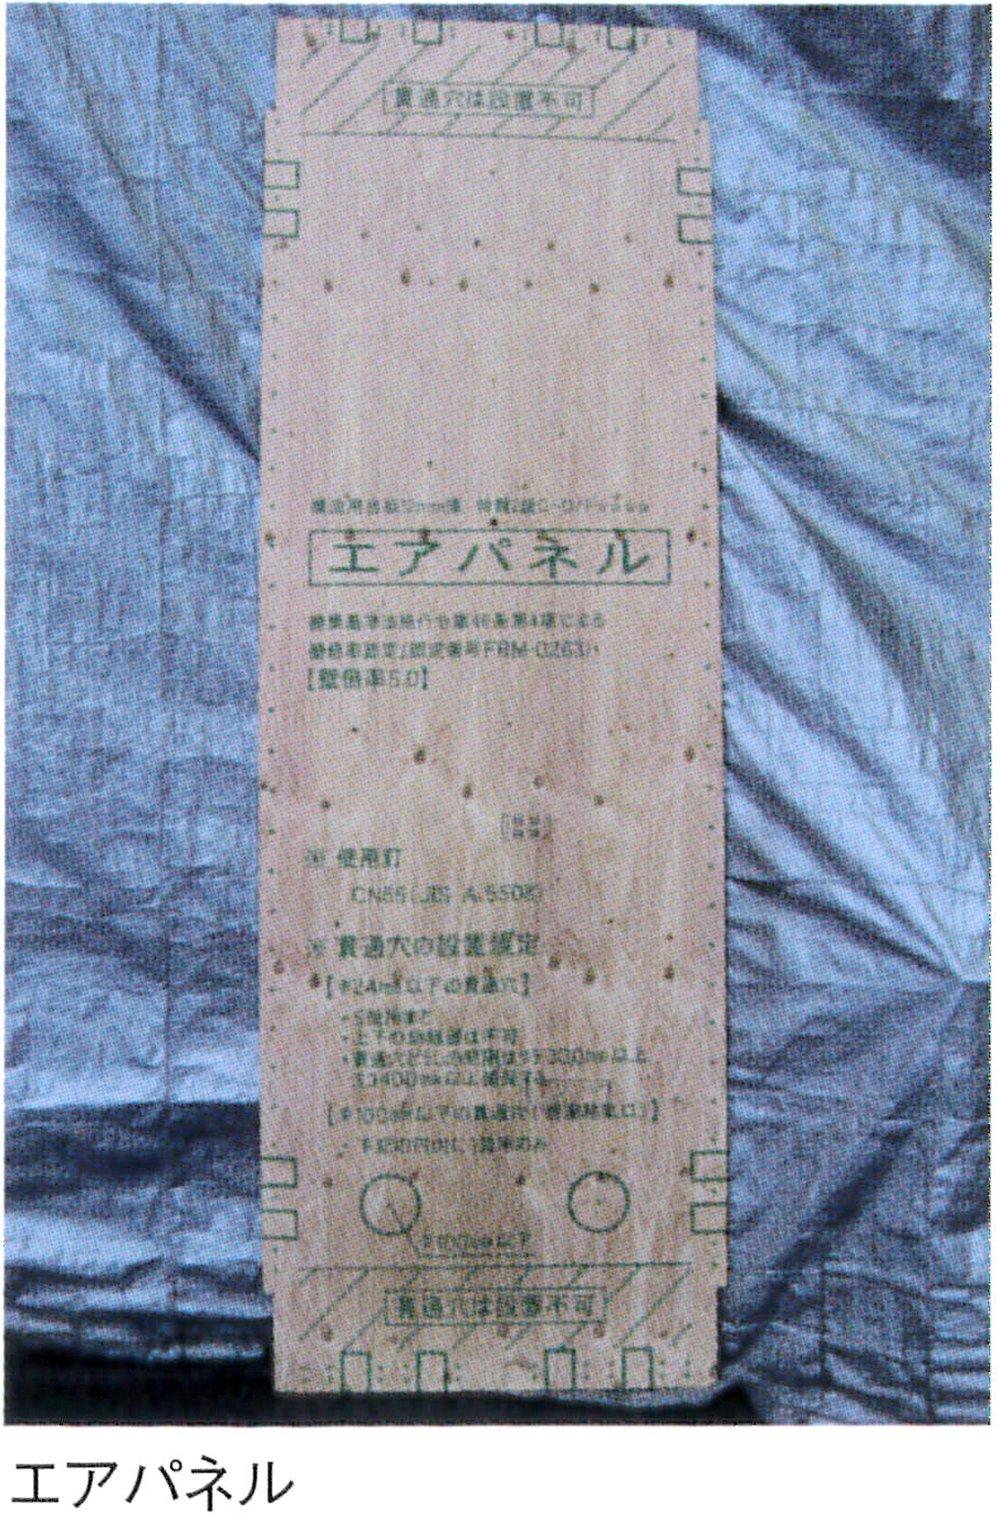 Other. Air panel is a "load-bearing wall" is, 2000 Building Standards Law amended, To get Japan's first Minister of Land, Infrastructure and Transport certification for structural strength major Jikukumi etc., Was recognized as the country is the highest strength to determine there is a performance of the "wall of 5.0".